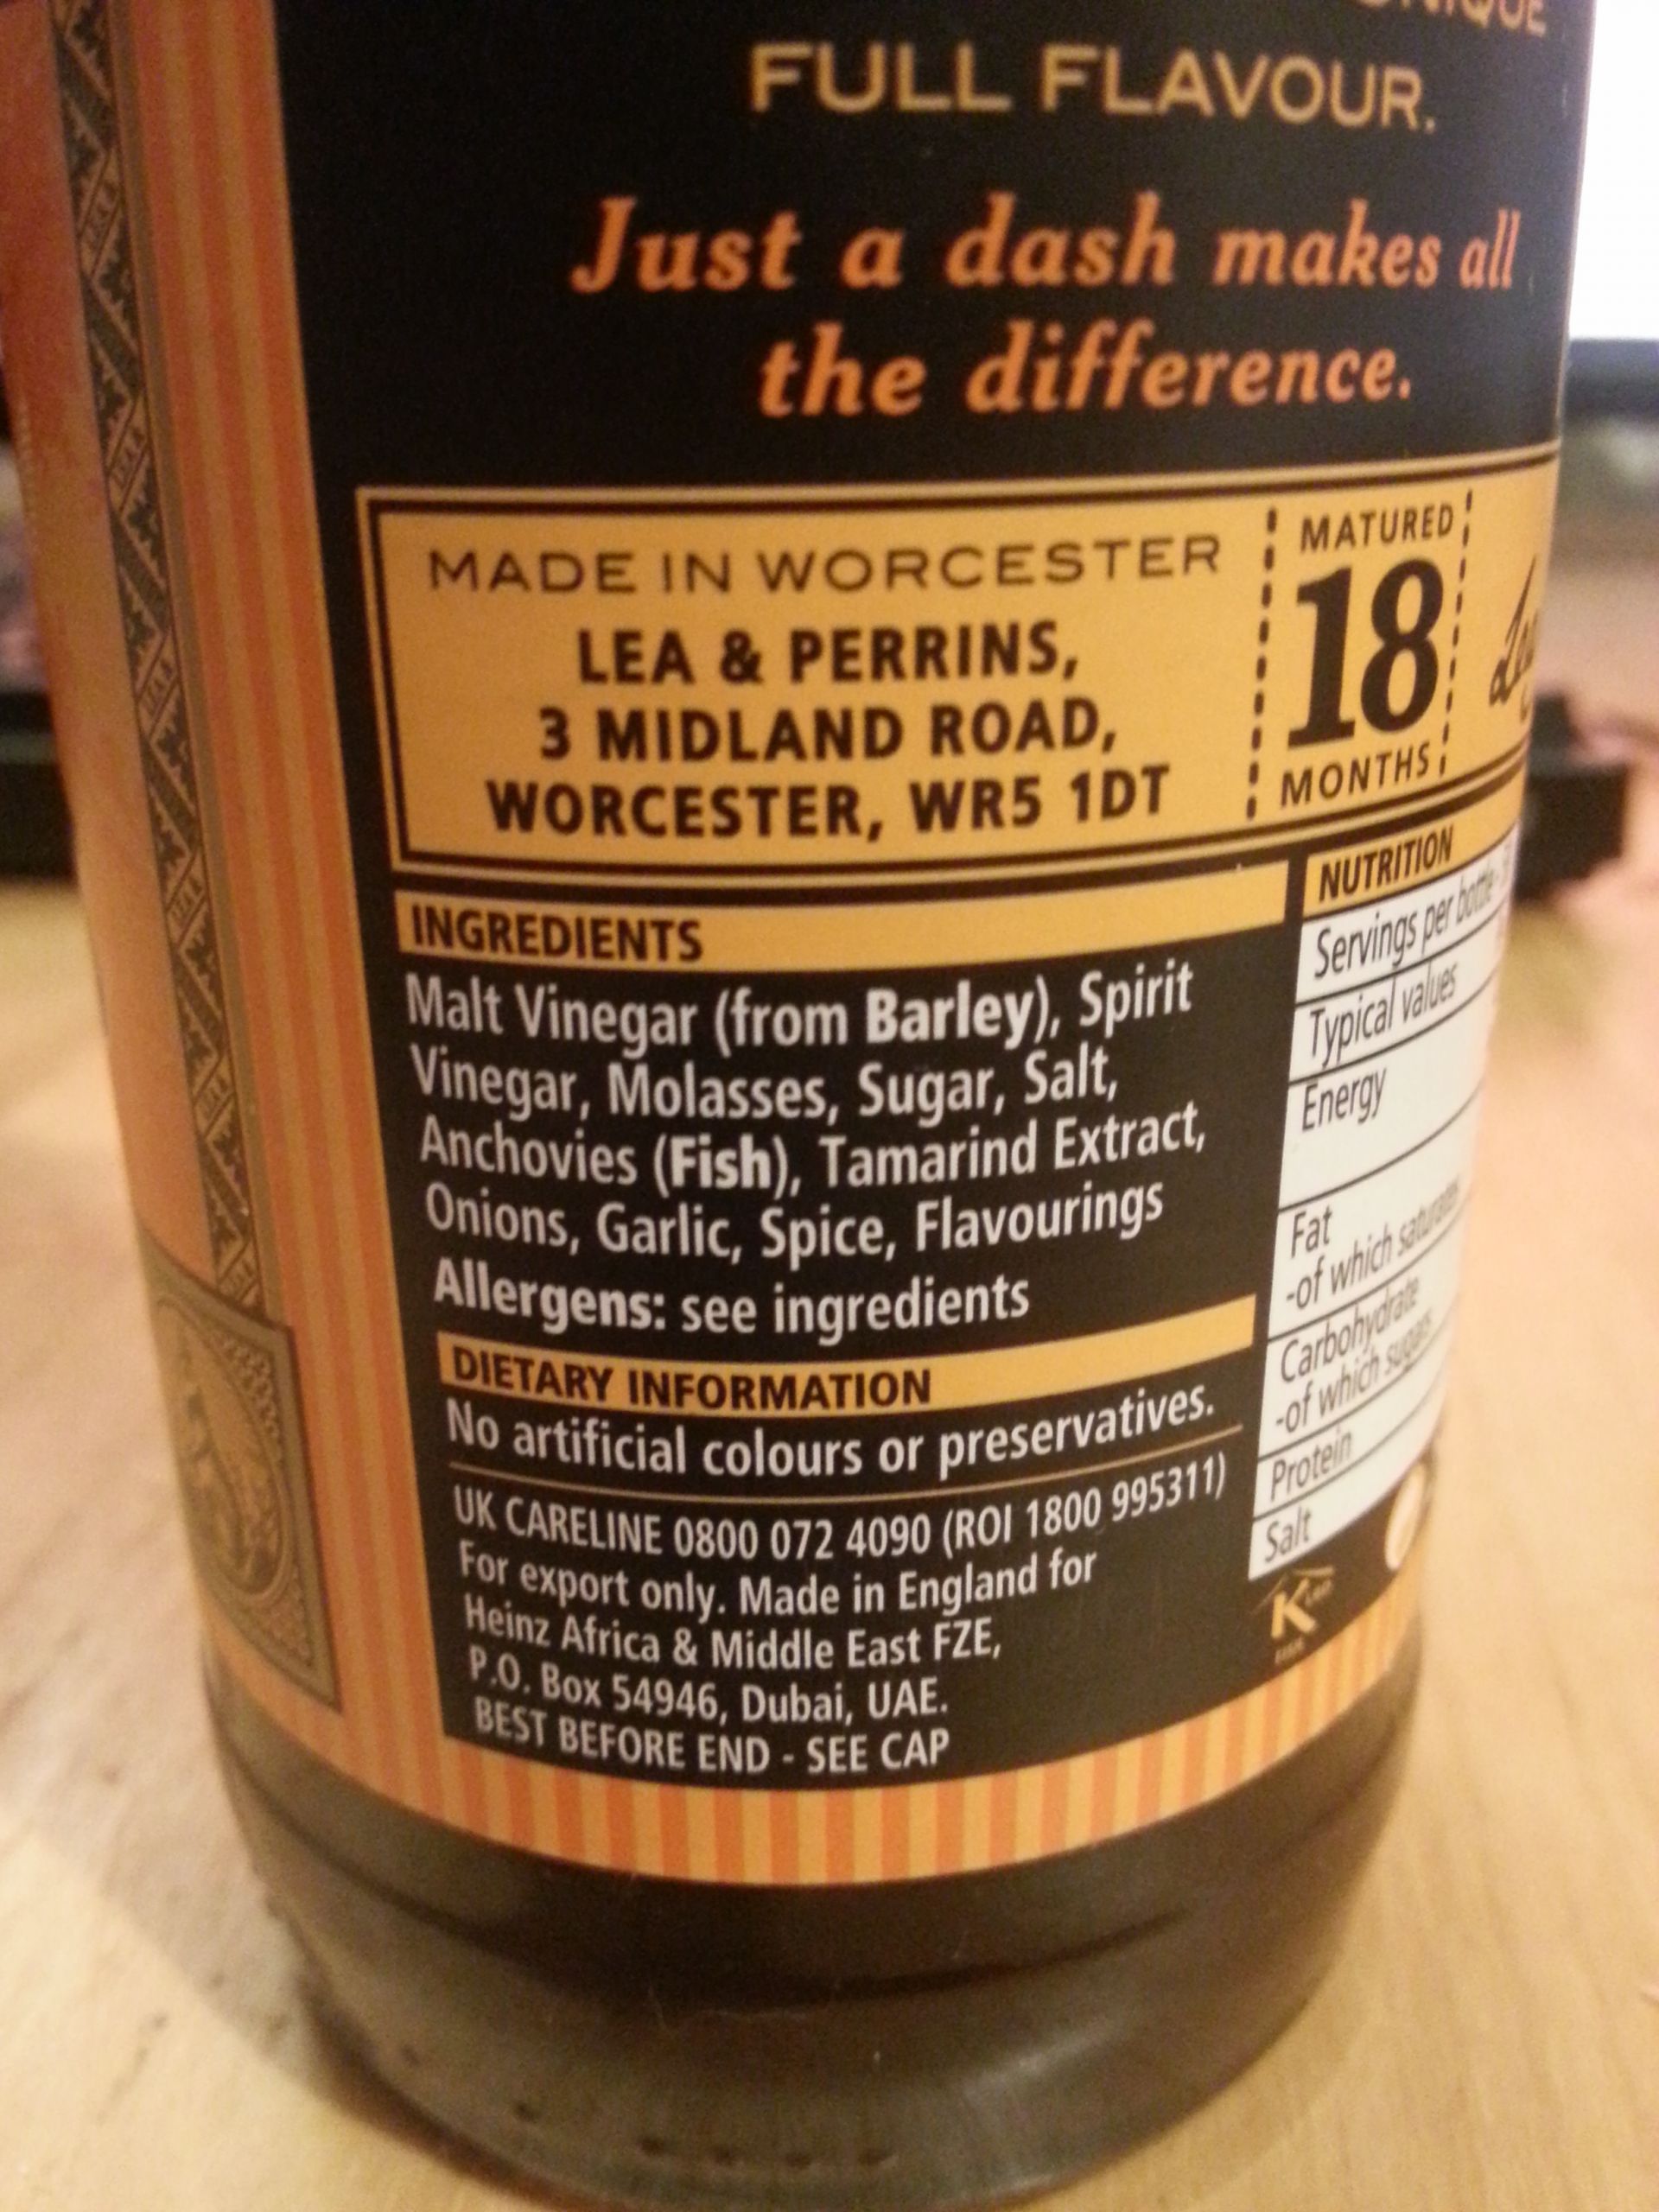 List Of Sauces
 This Worcestershire sauce has a recursive list of